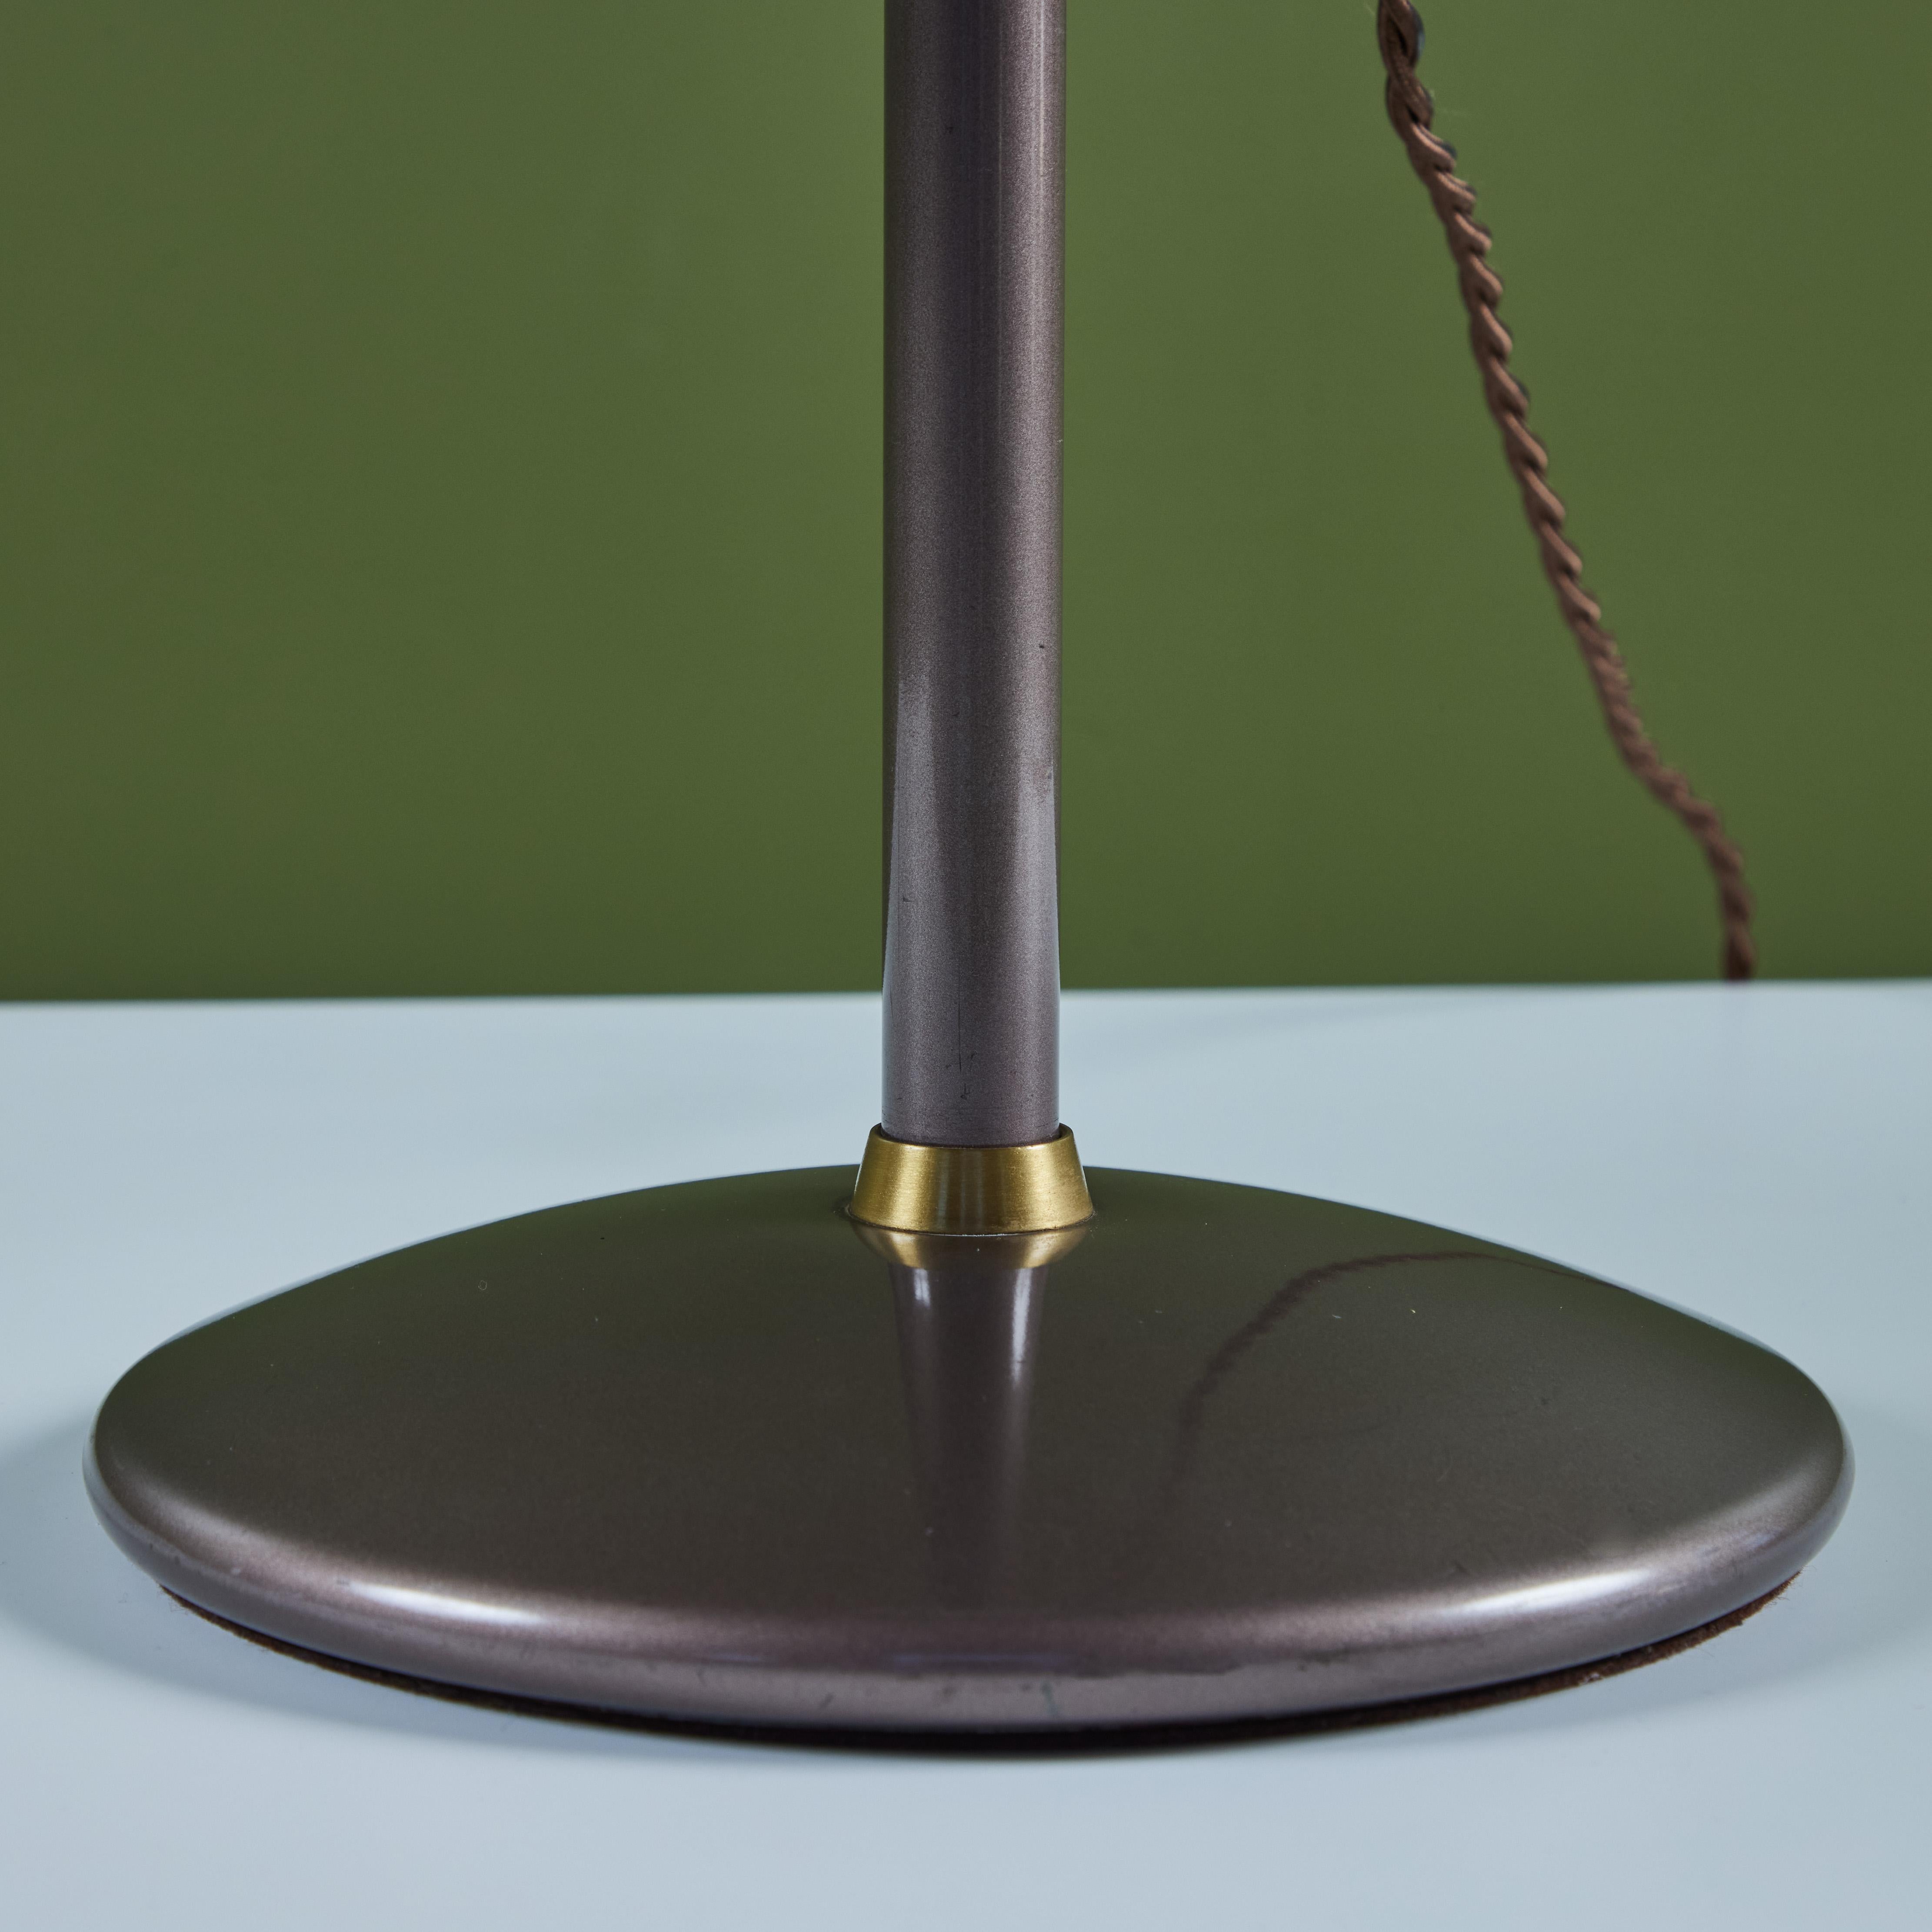 Dazor Taupe Enamel Desk Lamp with Brass Accents 7